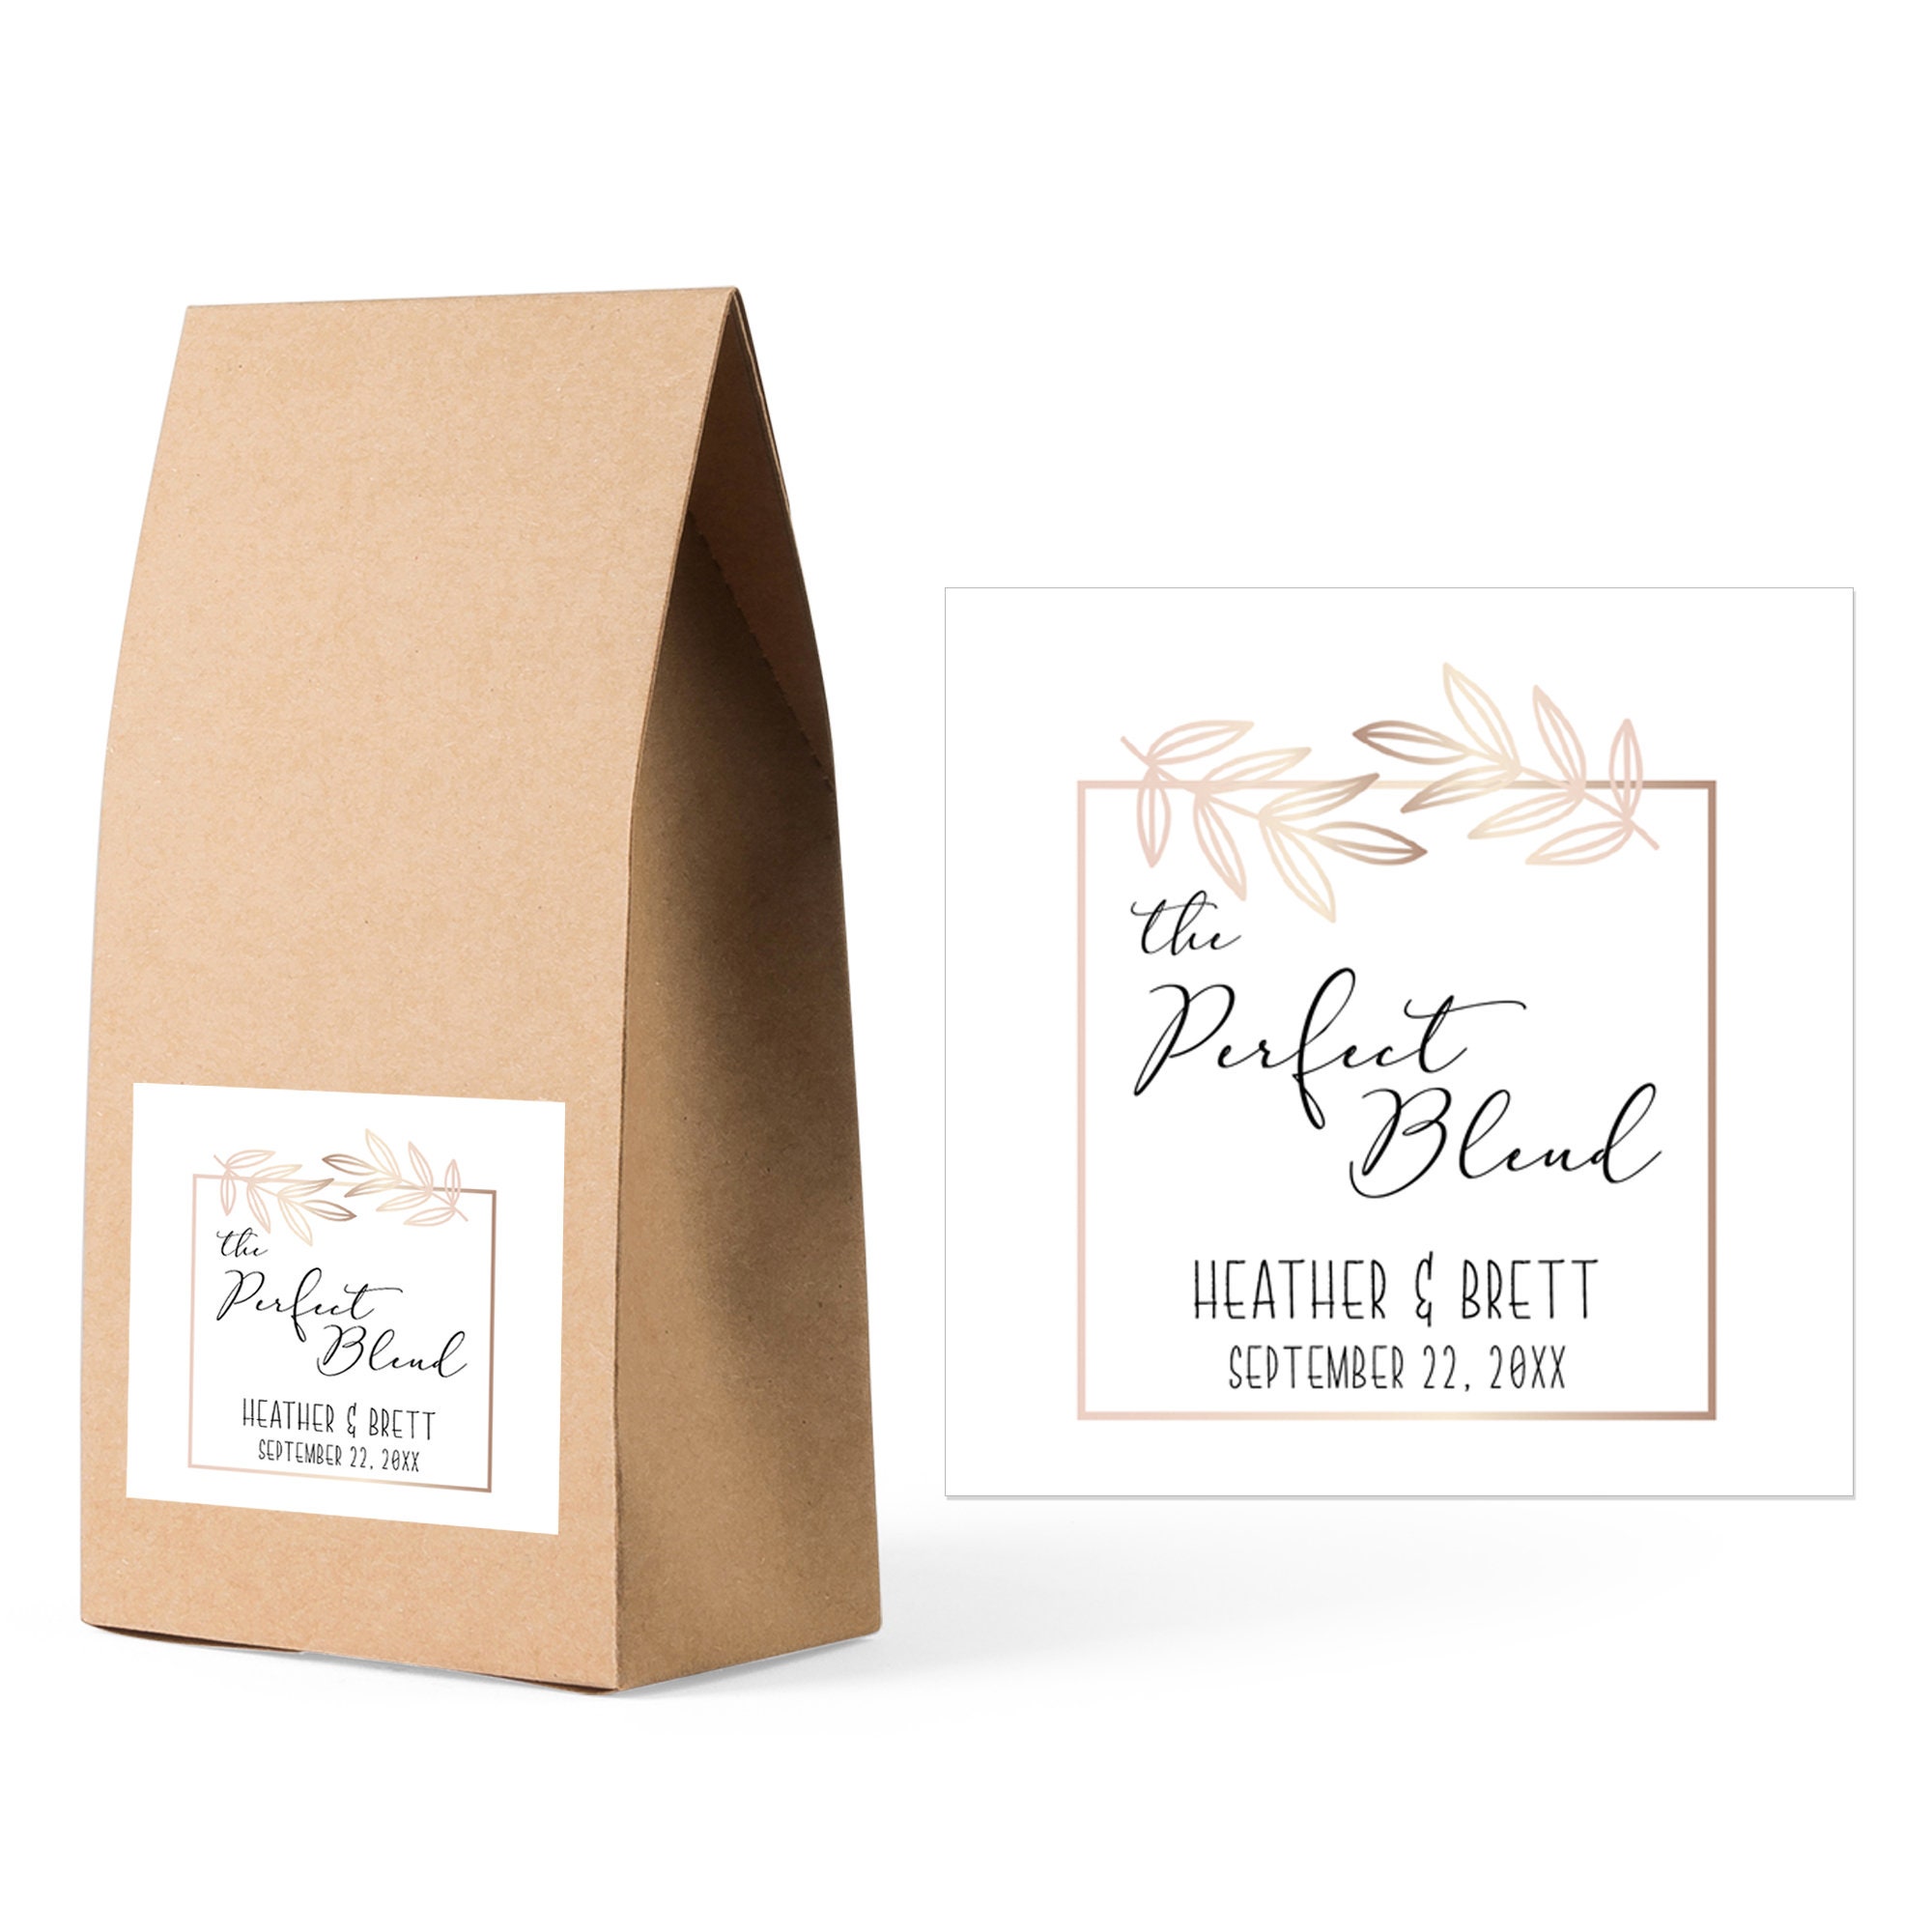 Perfect Blend Coffee Bag Label | Wedding Favor Labels For Favors| Make Your Own